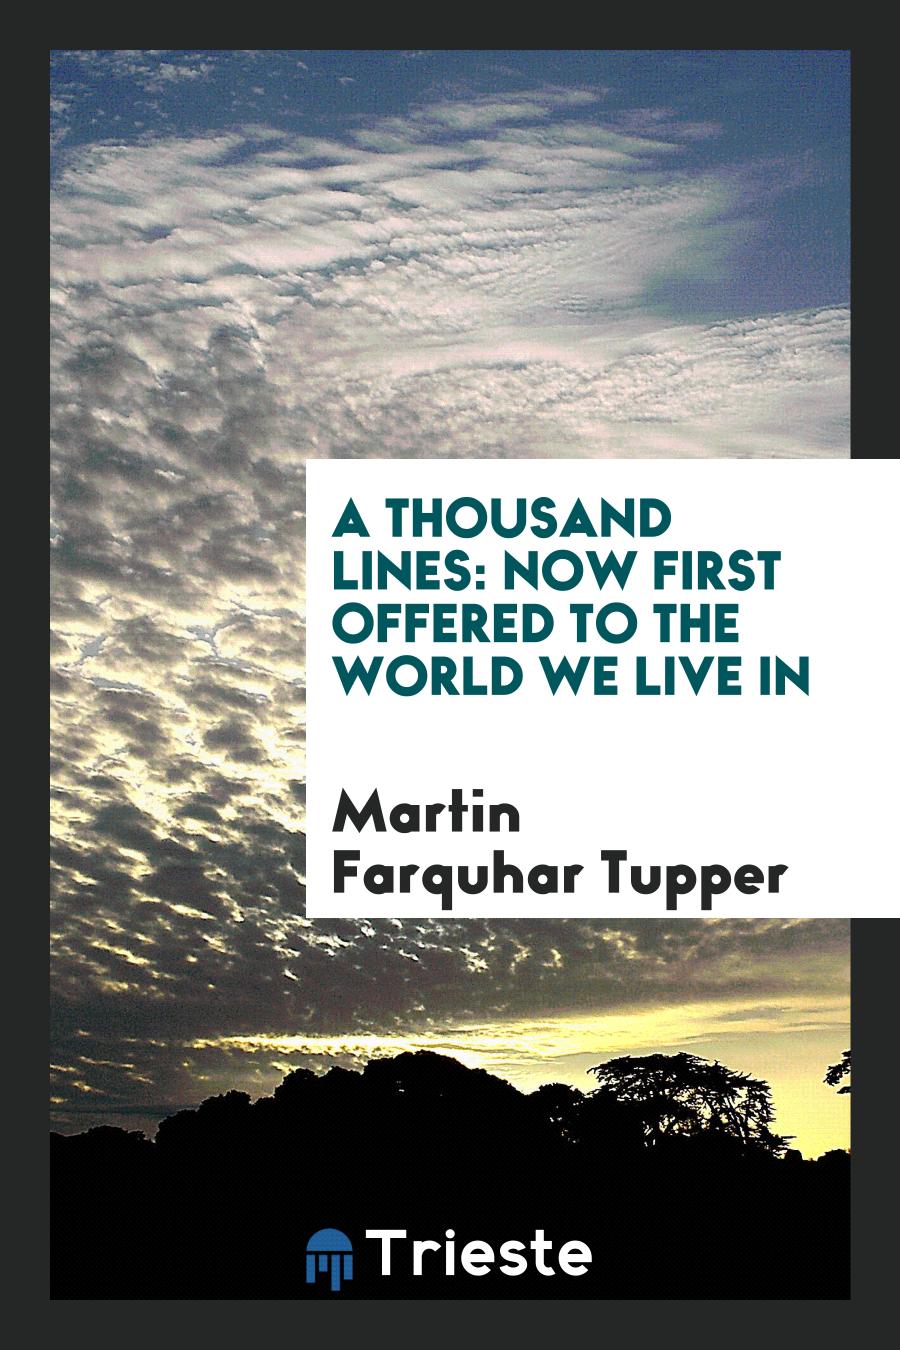 A thousand lines: now first offered to the world we live in